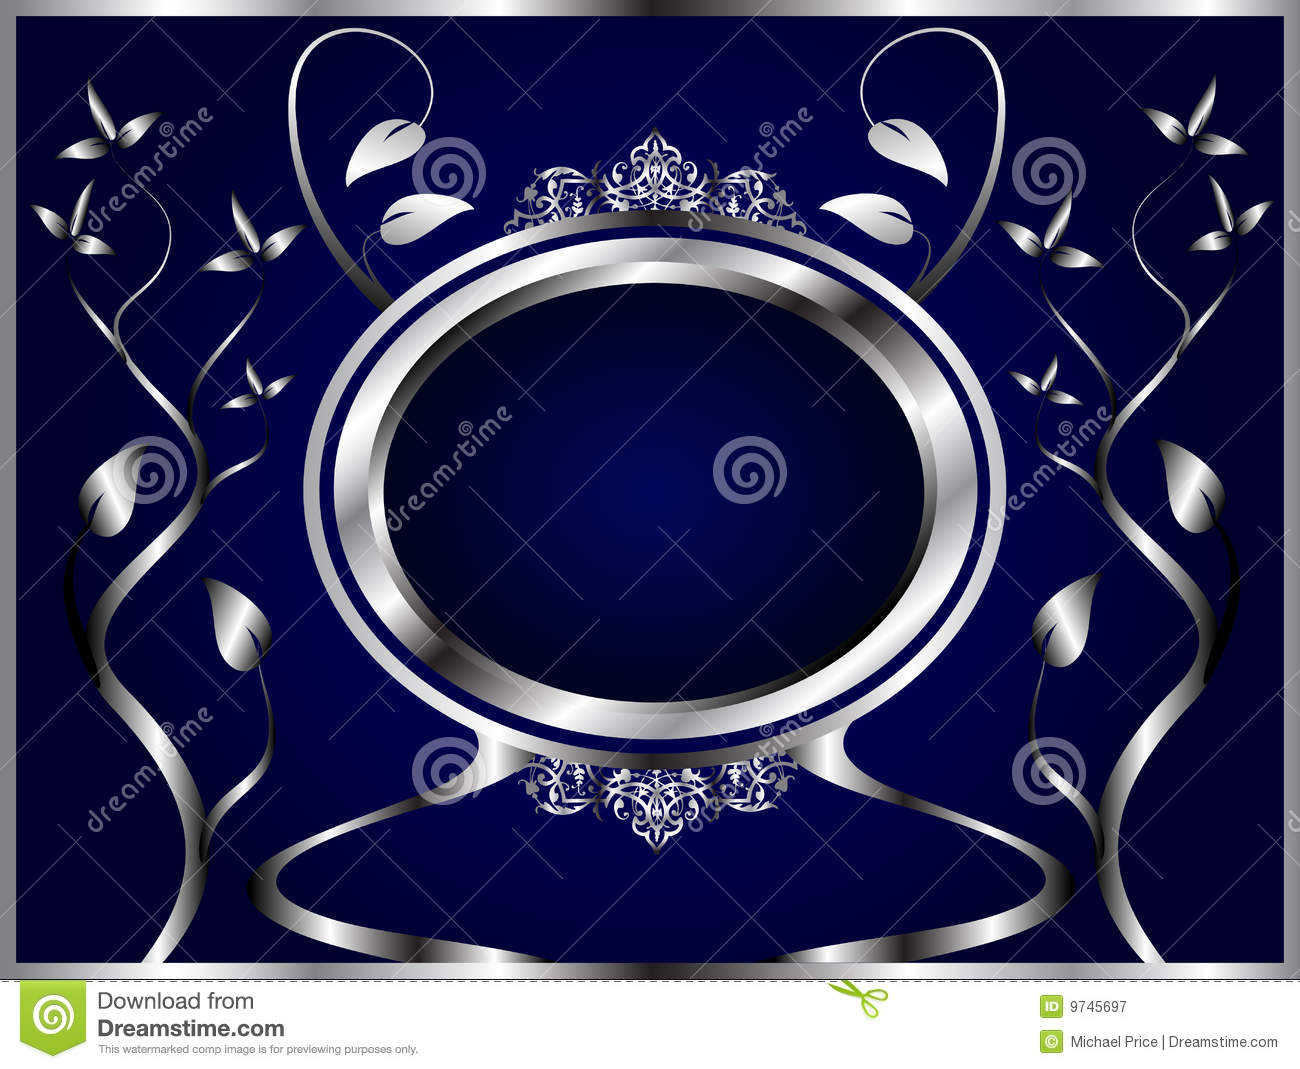 Royal Blue and Silver Abstract